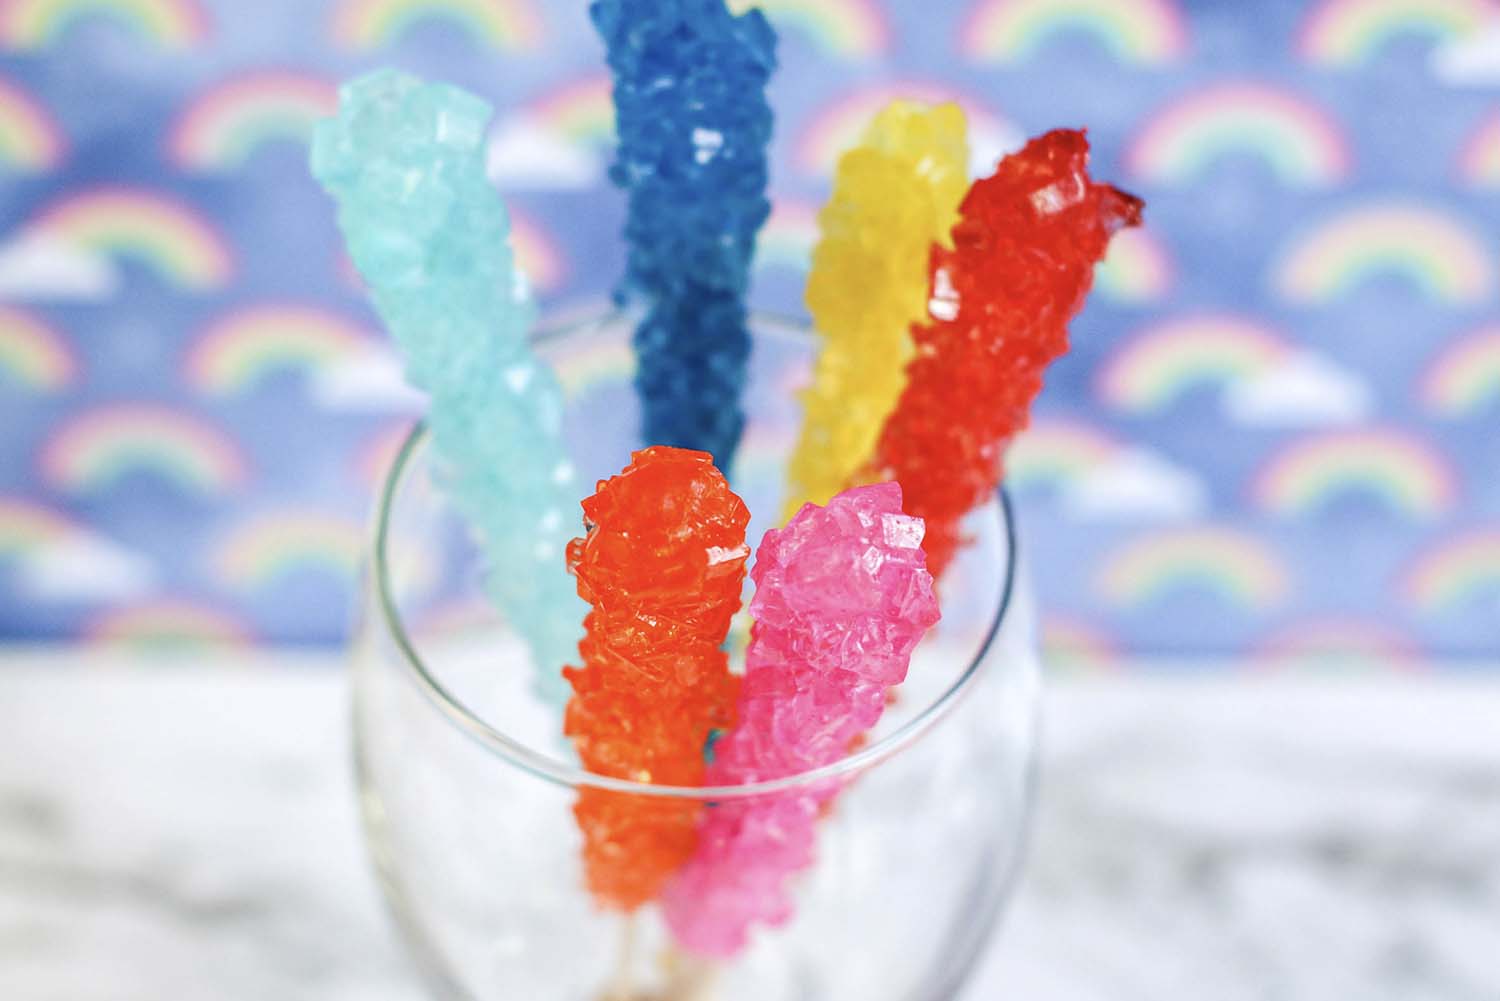 How to make Rock Candy/Sugar Crystals - Edible Science